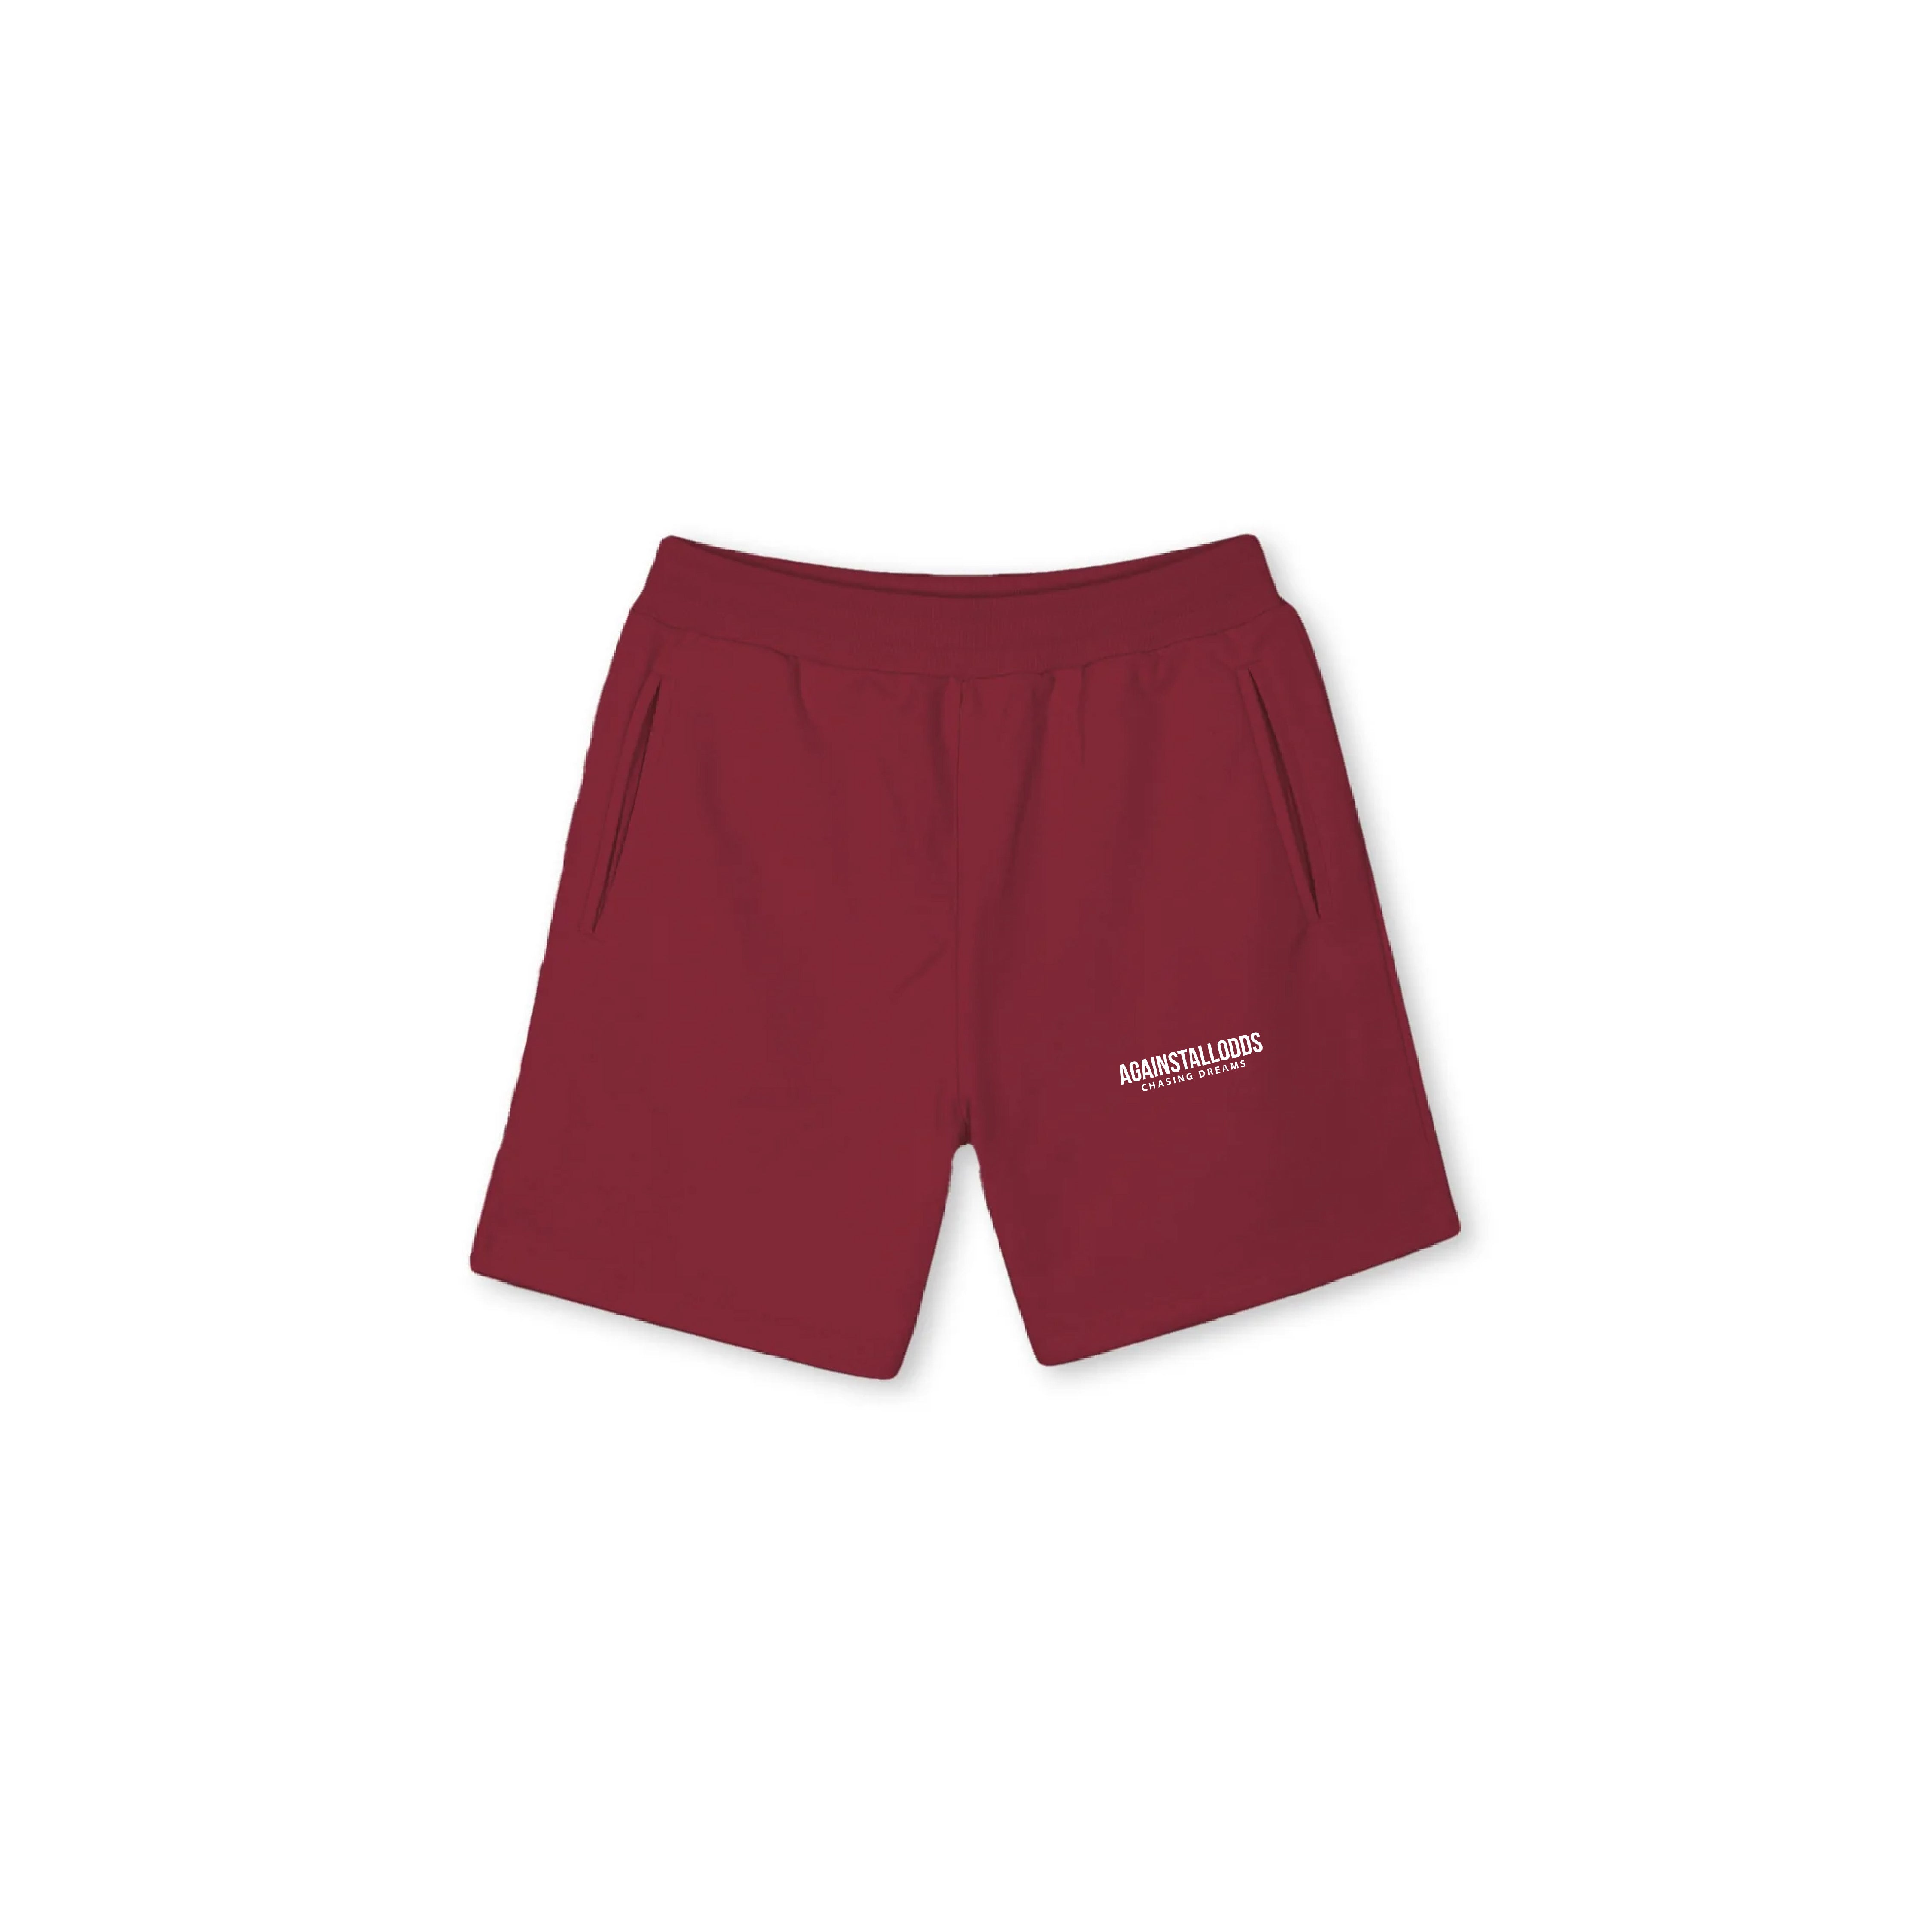 Dreamers French Terry Shorts - Burgundy